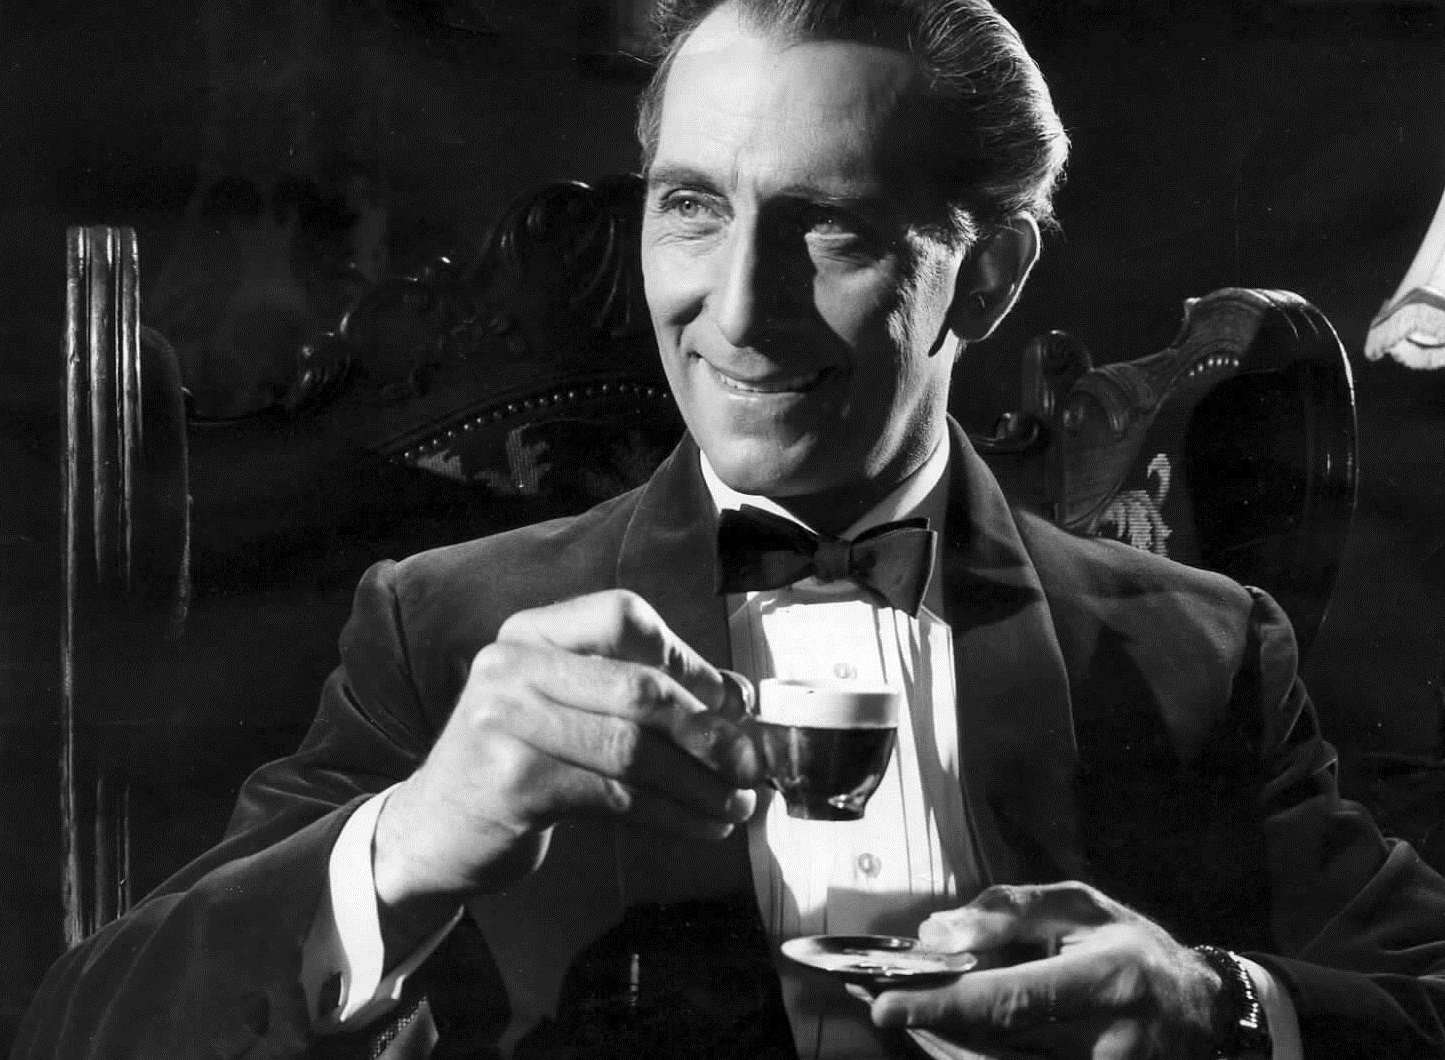 Peter Cushing was a veteran actor until his death more than 20 years ago